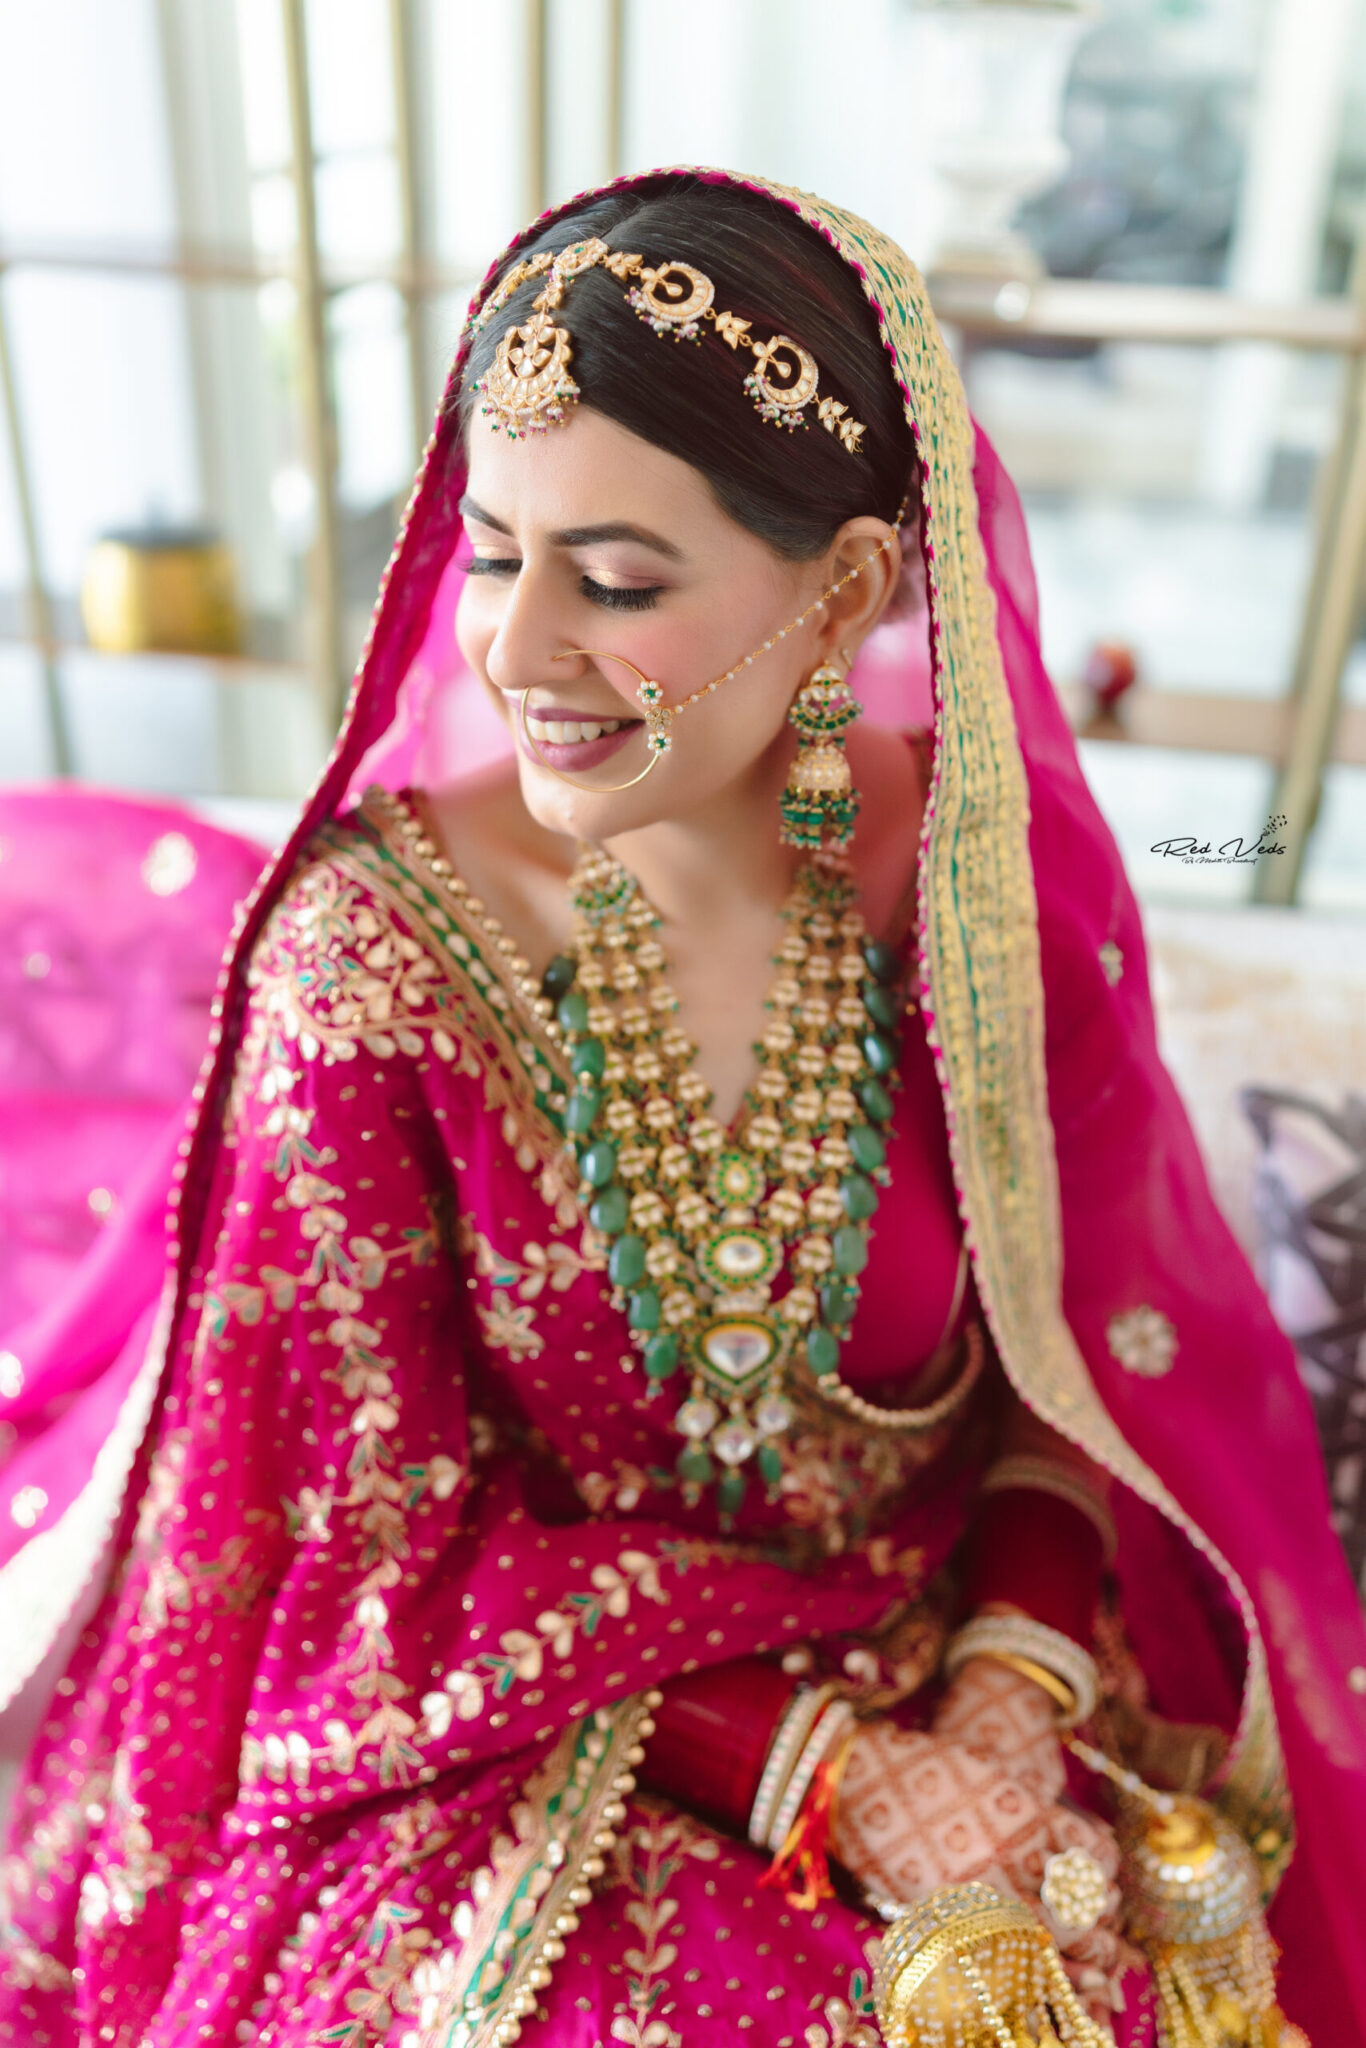 500+ Indian Wedding Photography Pictures | Download Free Images on Unsplash